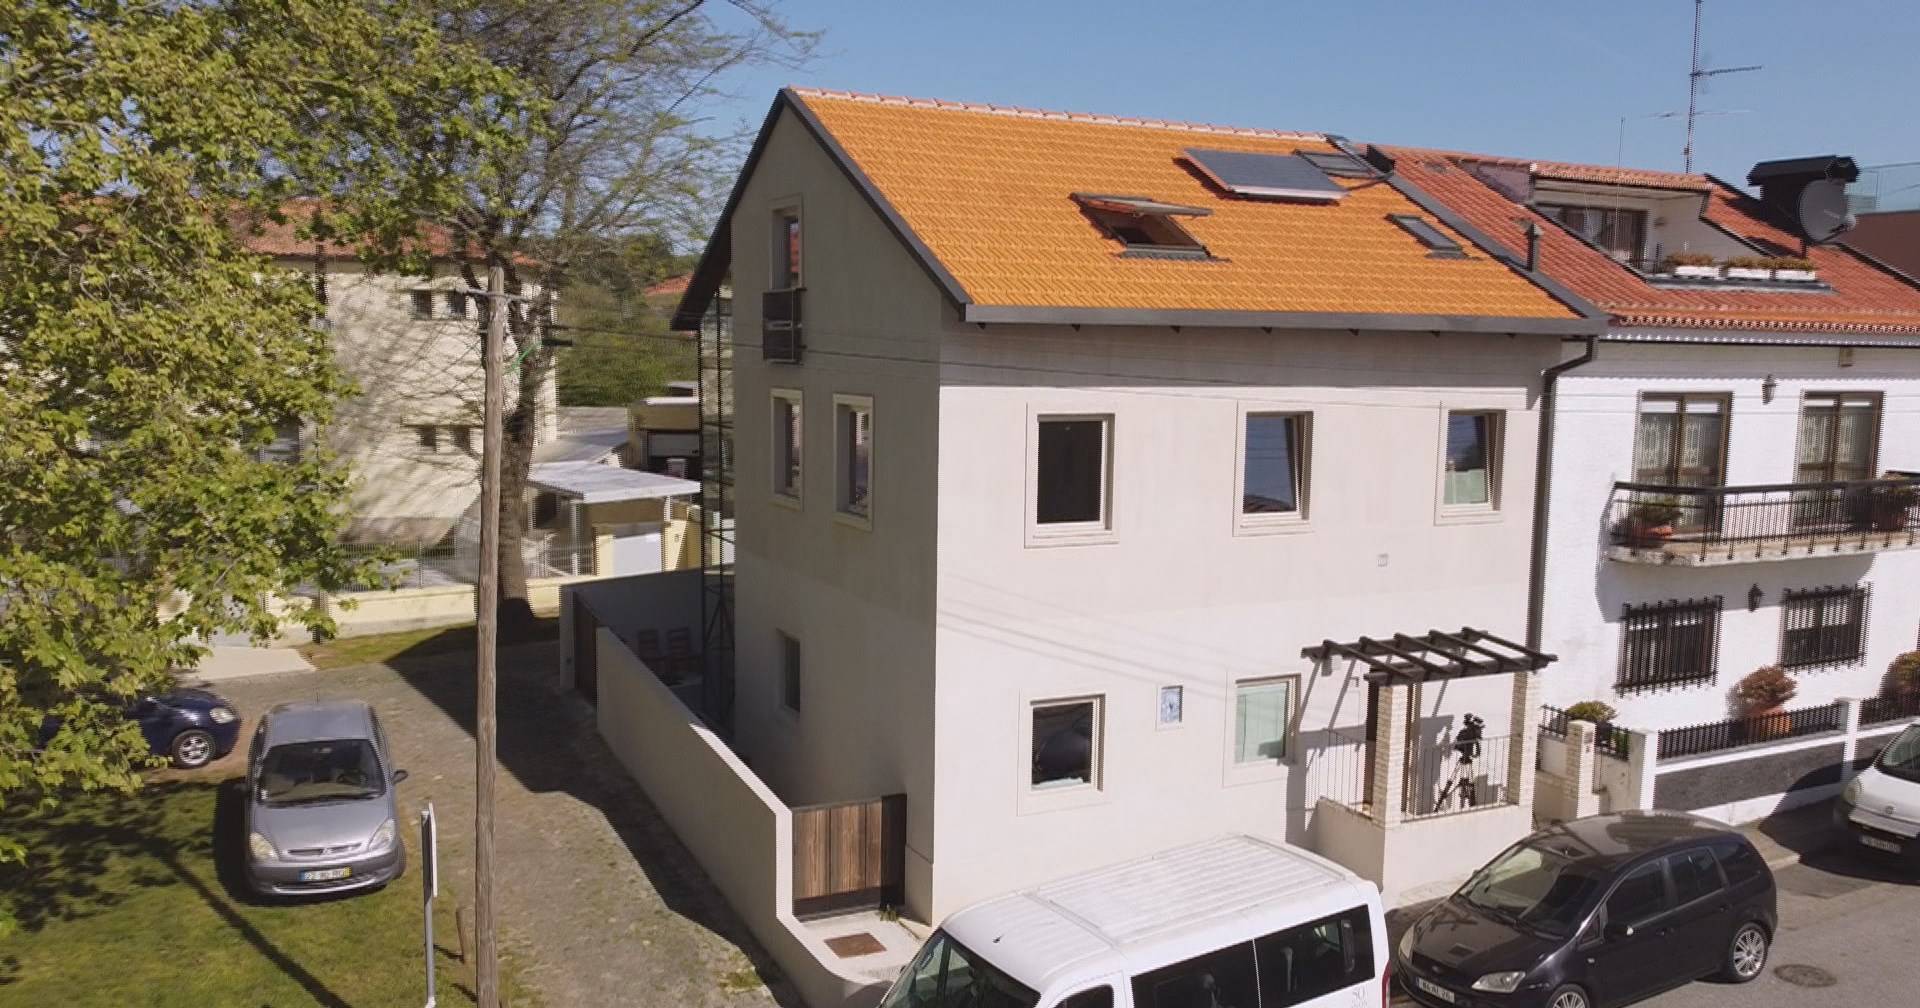 Building houses with hemp: the environmental alternative growing in Portugal